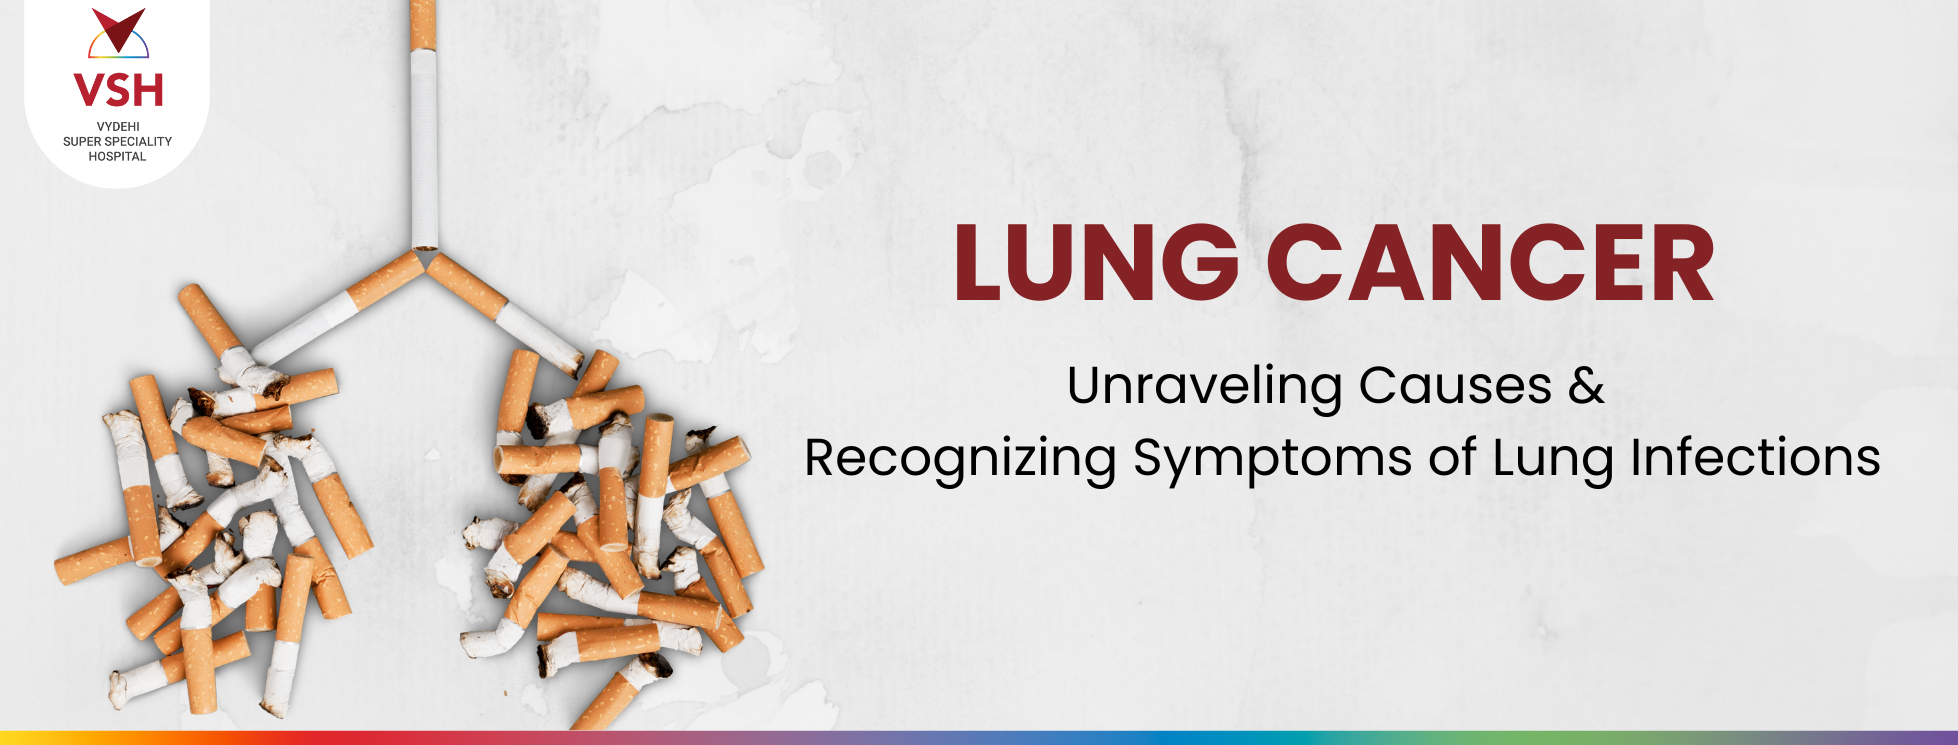 Lung Cancer Causes, Symptoms and Treatment